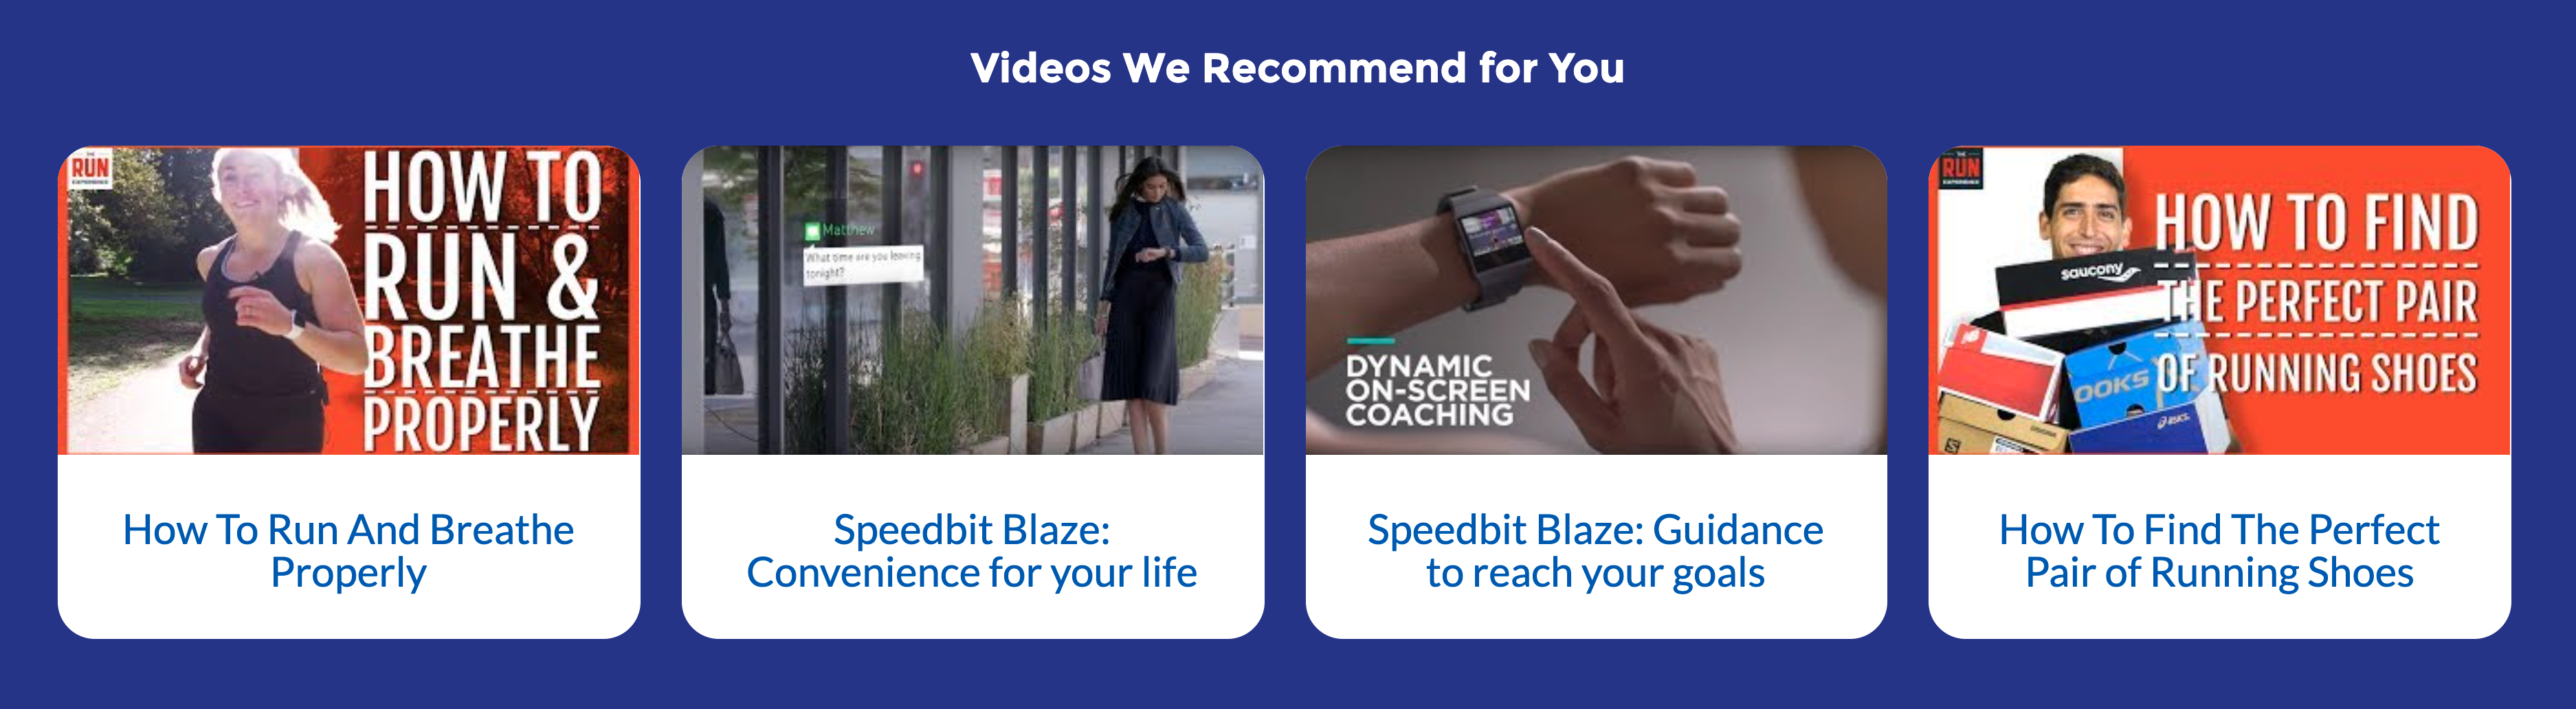 Recommended videos carousel